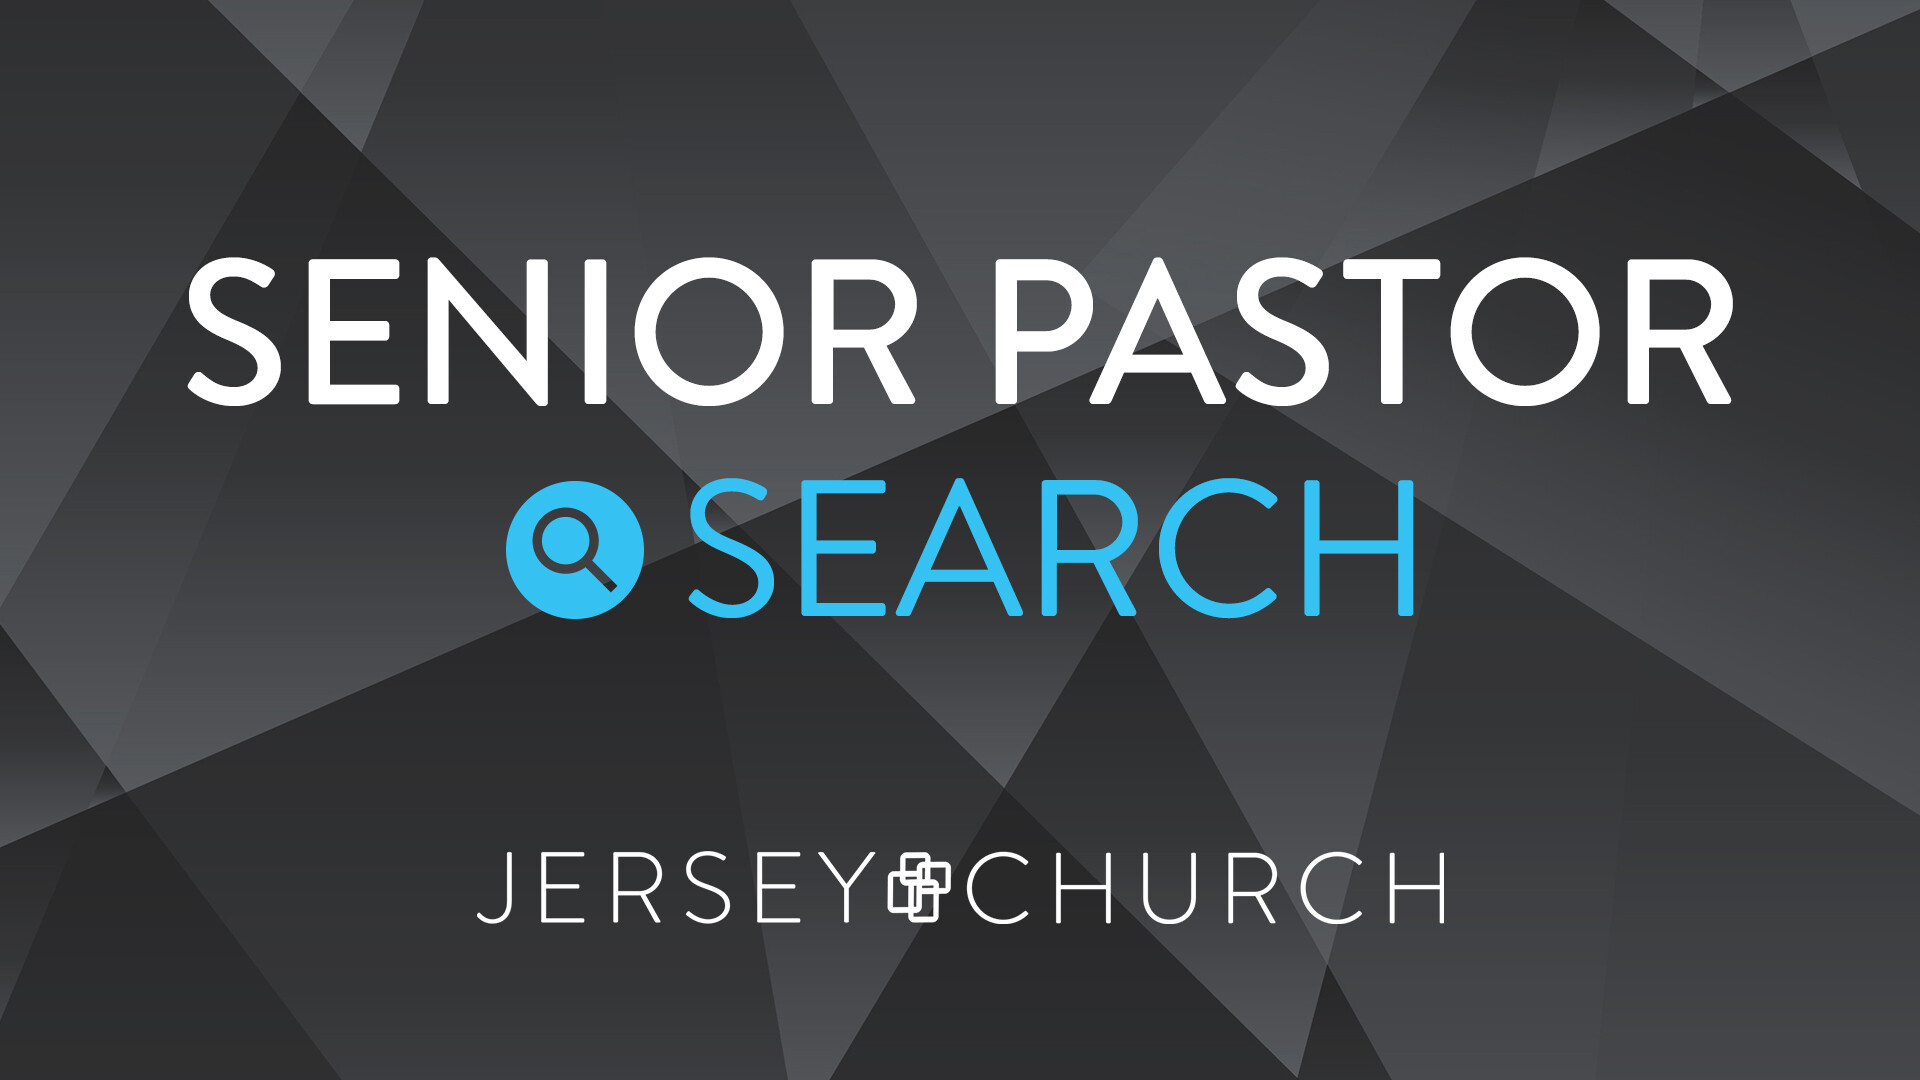 Church Council Announces Proposed Candidate for Senior Pastor